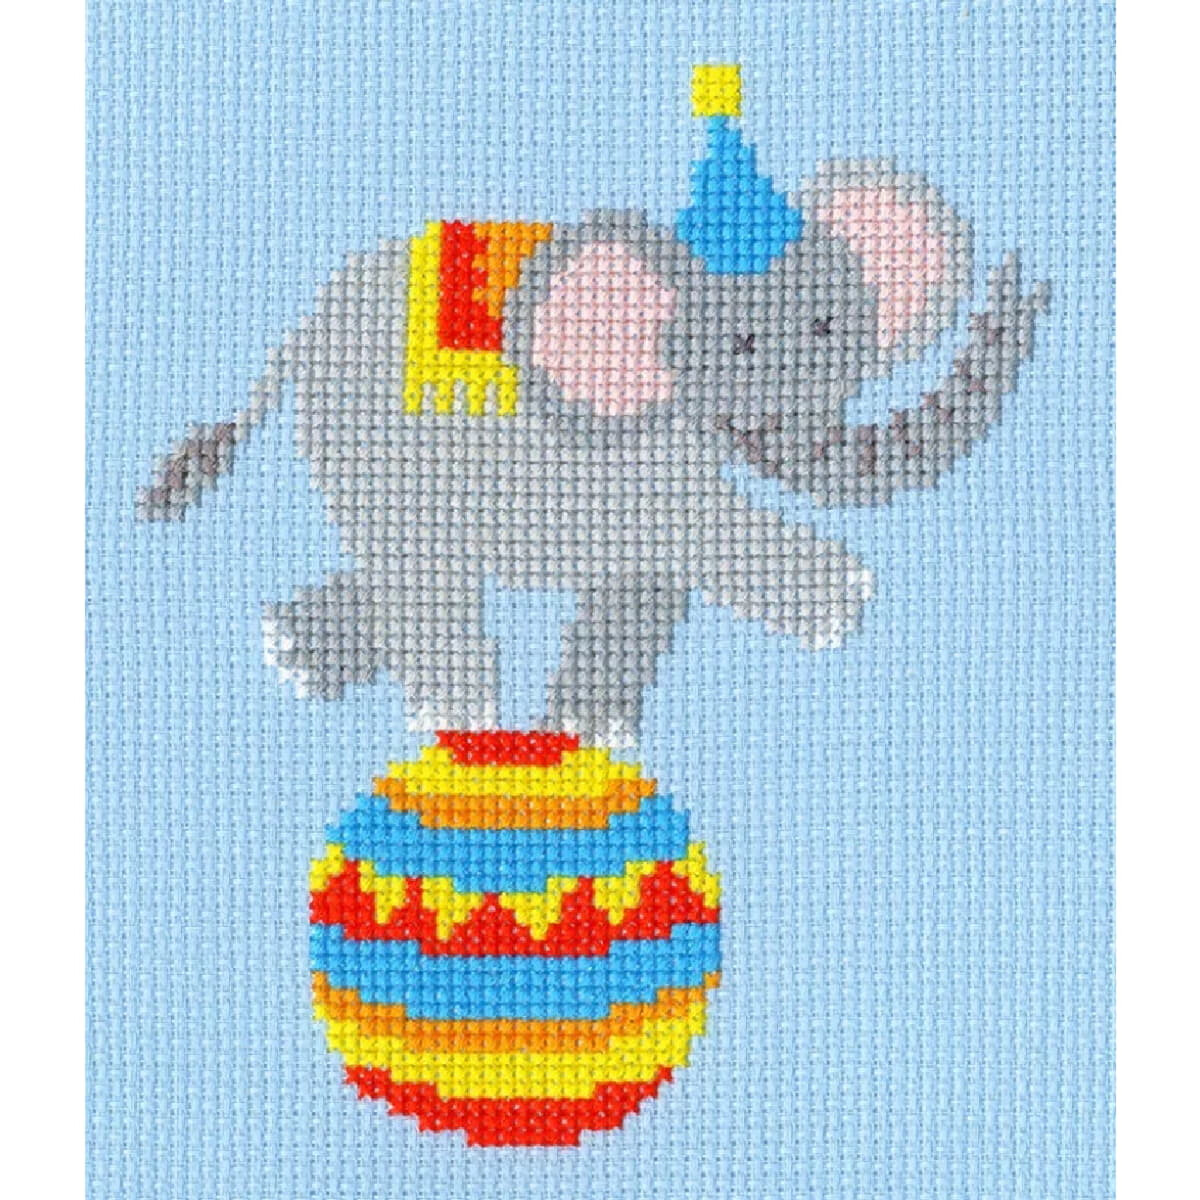 A colorful embroidery pack with a circus elephant...